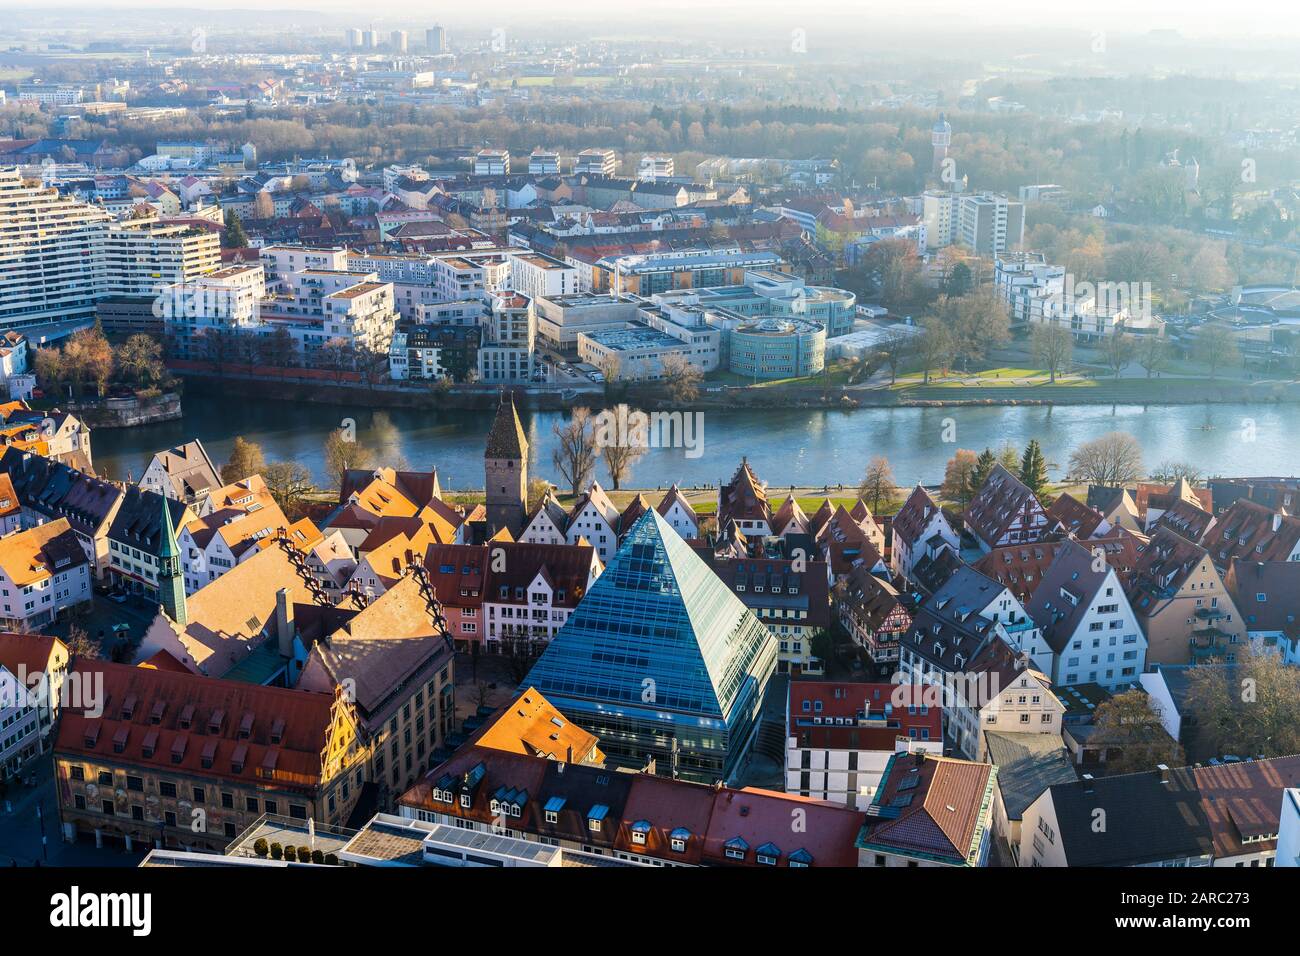 Ulm, Germany, December 29, 2019, Beautiful aerial view over roofs of old town houses and modern glass pyramid public library building next to danube r Stock Photo